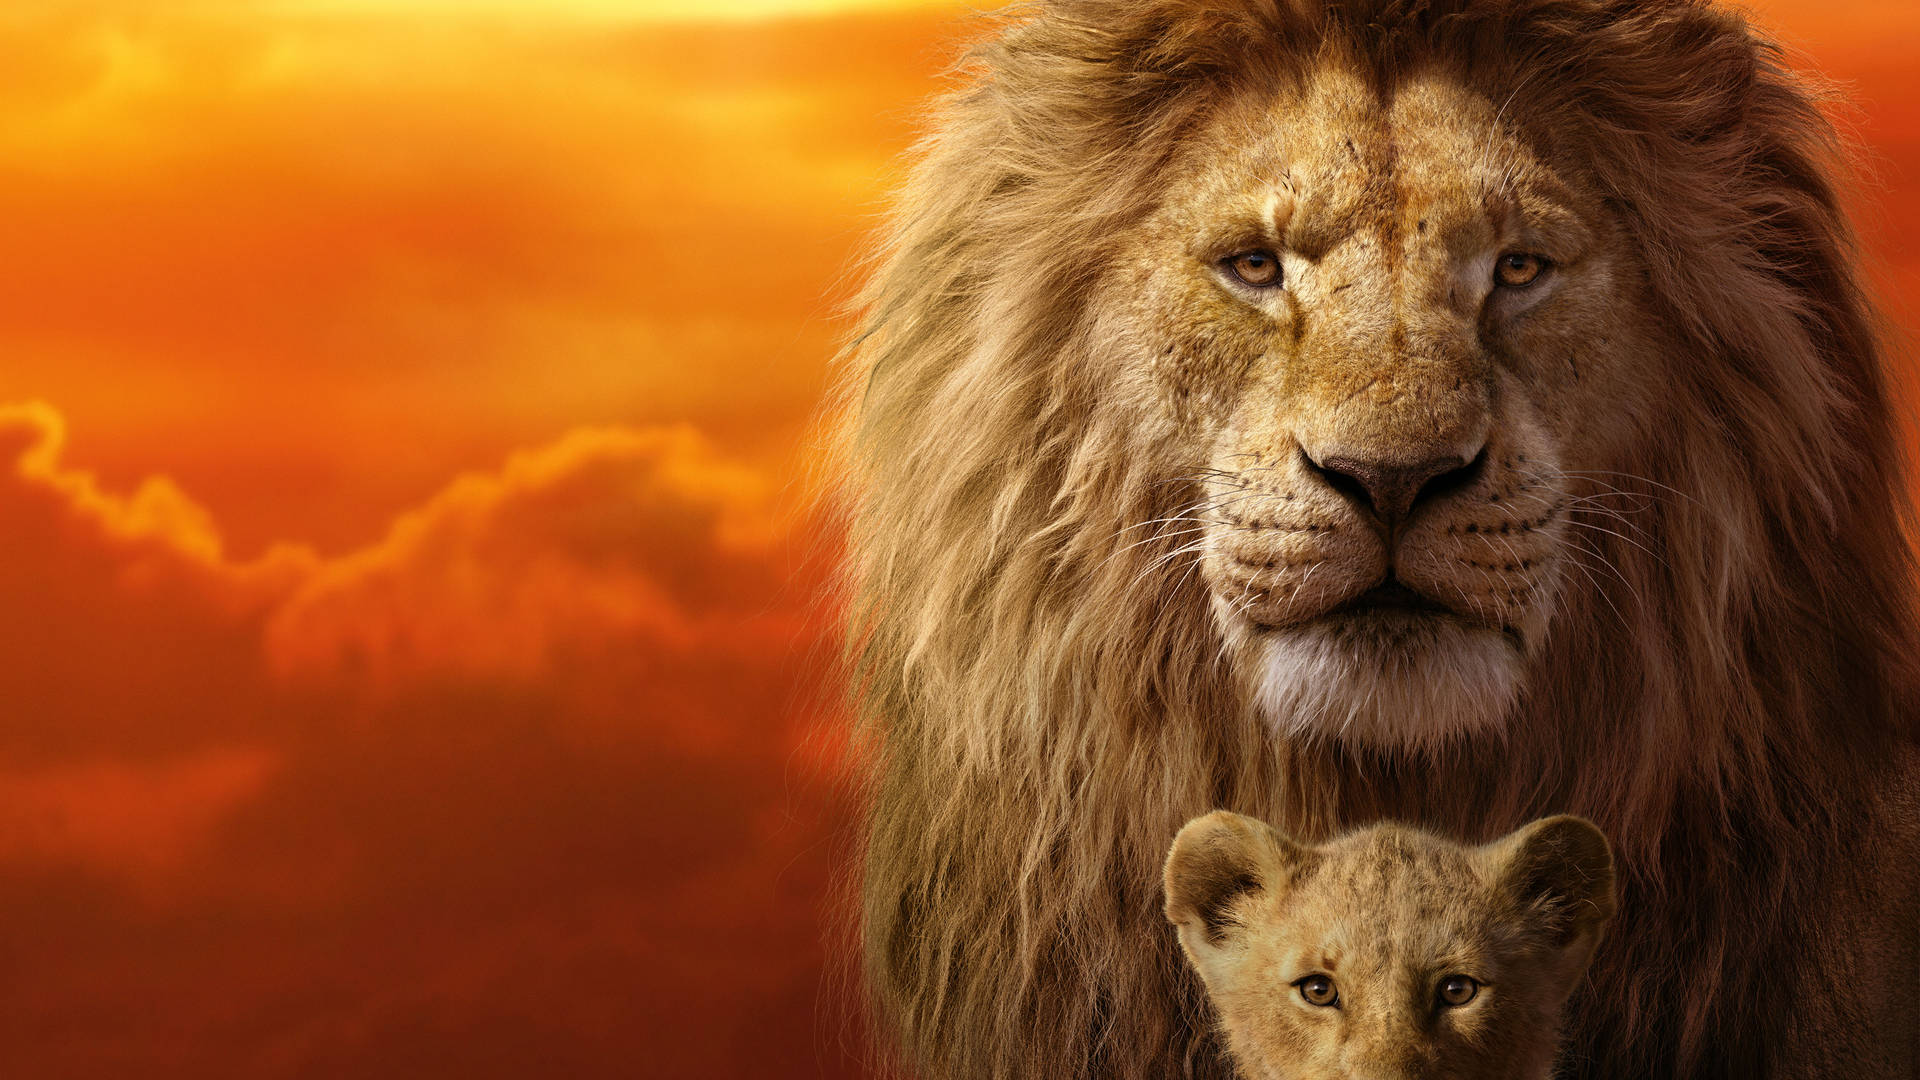 7680X4320 Lion King Wallpaper and Background